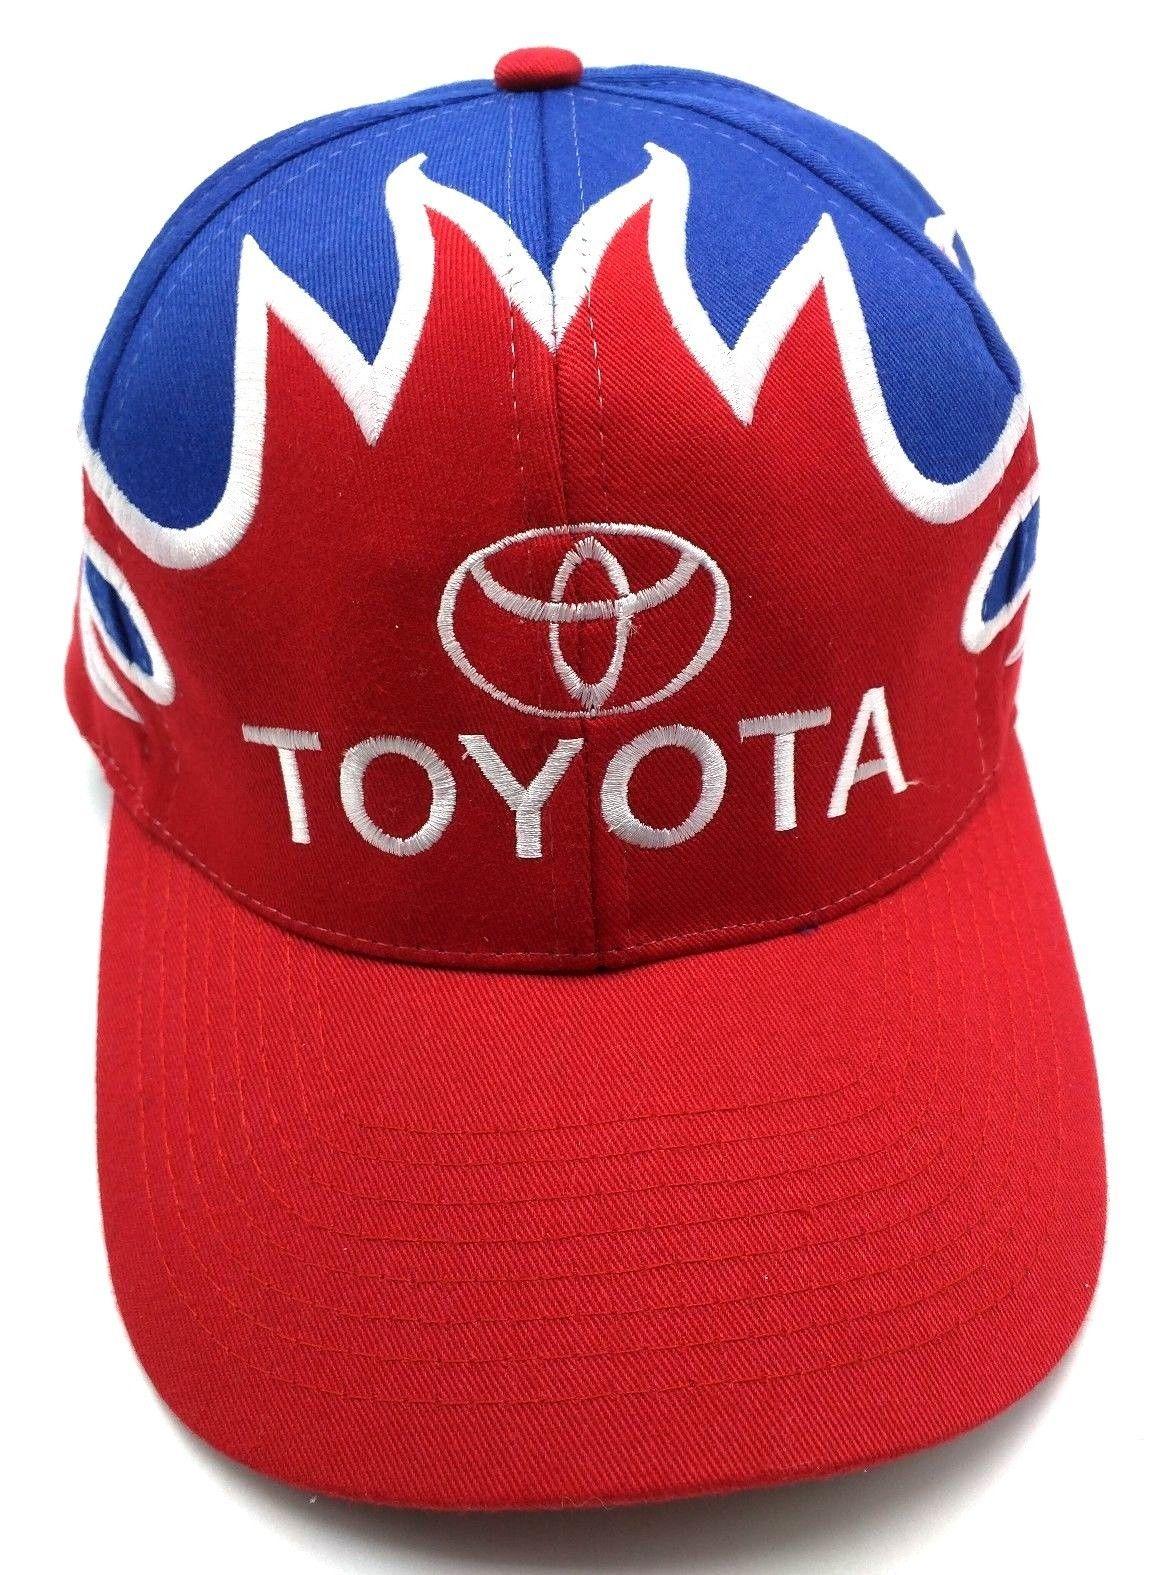 Red and White Flame Logo - TOYOTA flame / pattern red / white / flame blue adjustable cap / hat